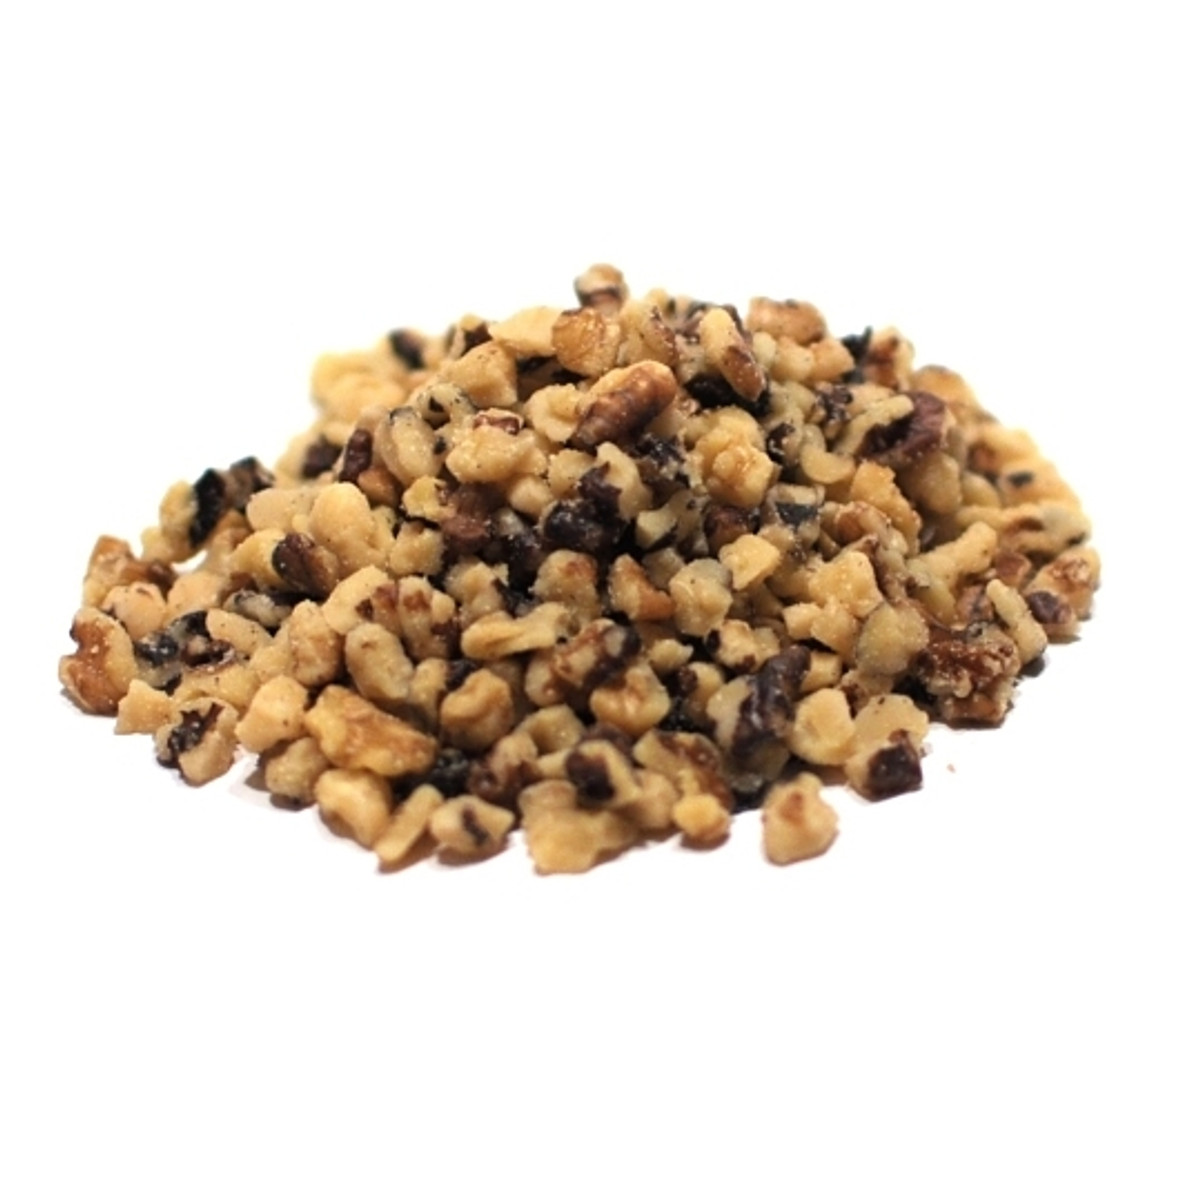 Commodity Walnut Bakers Pieces, 30 Pounds